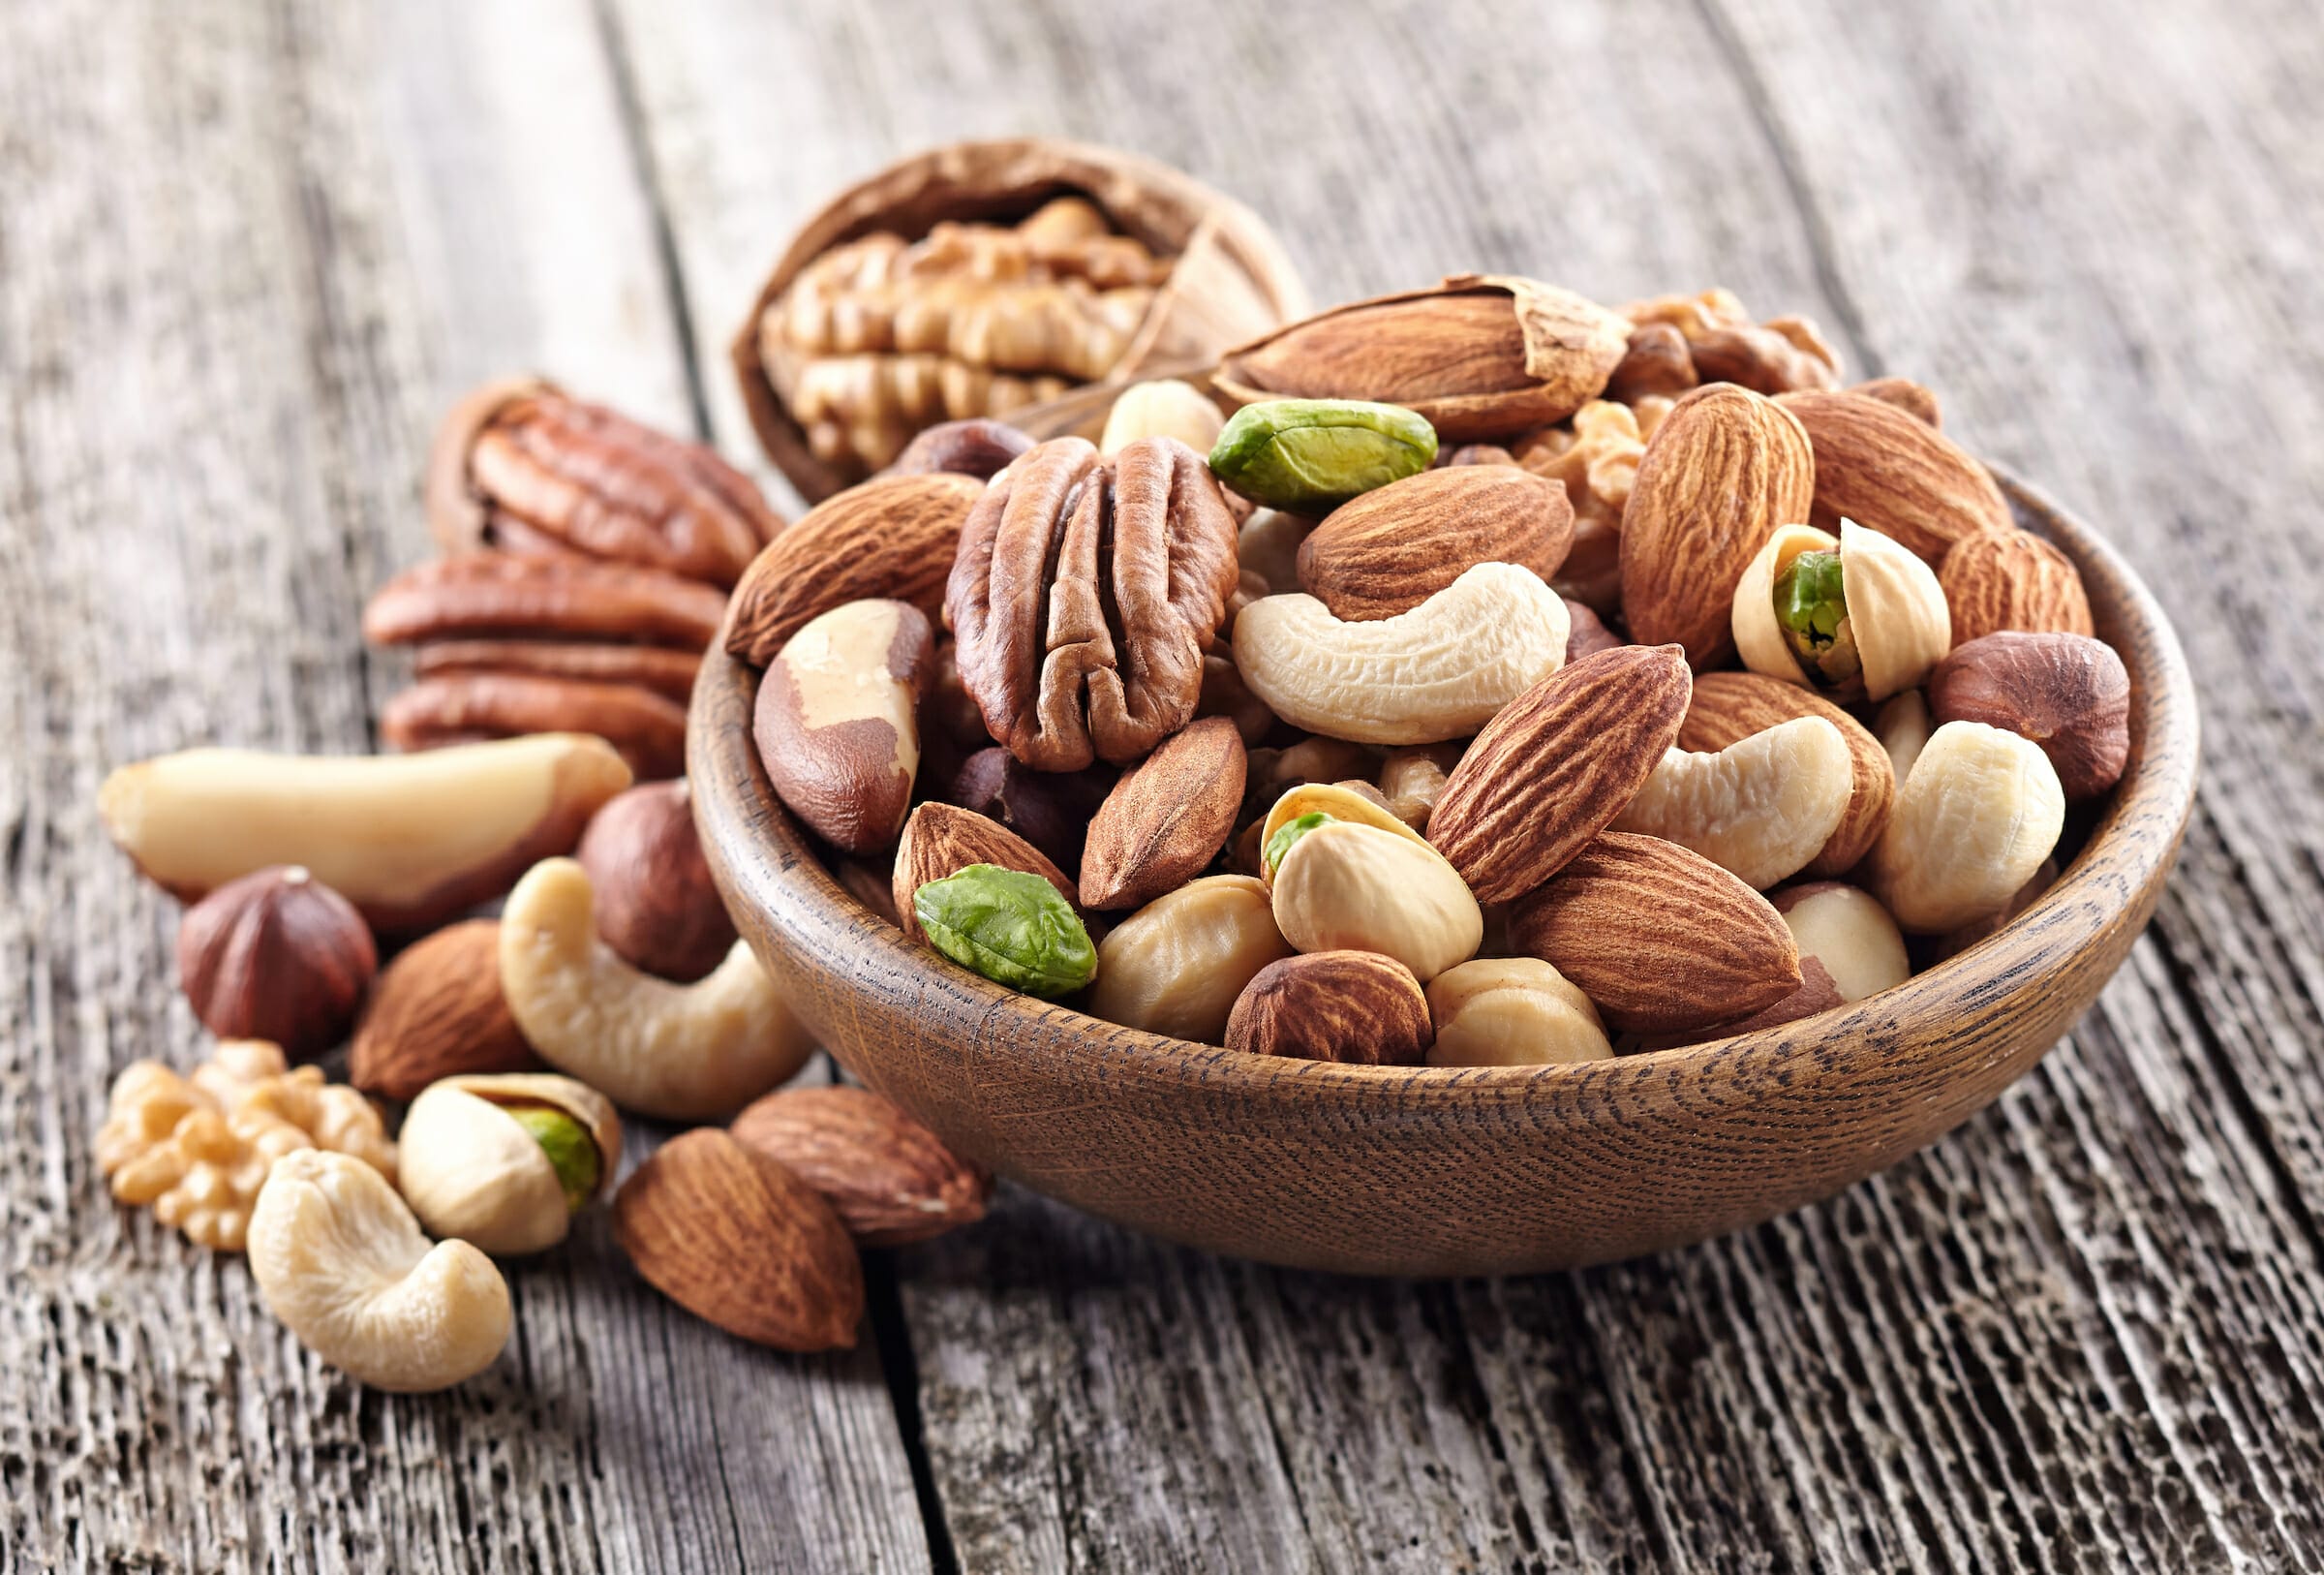 Best nuts and seeds for keto